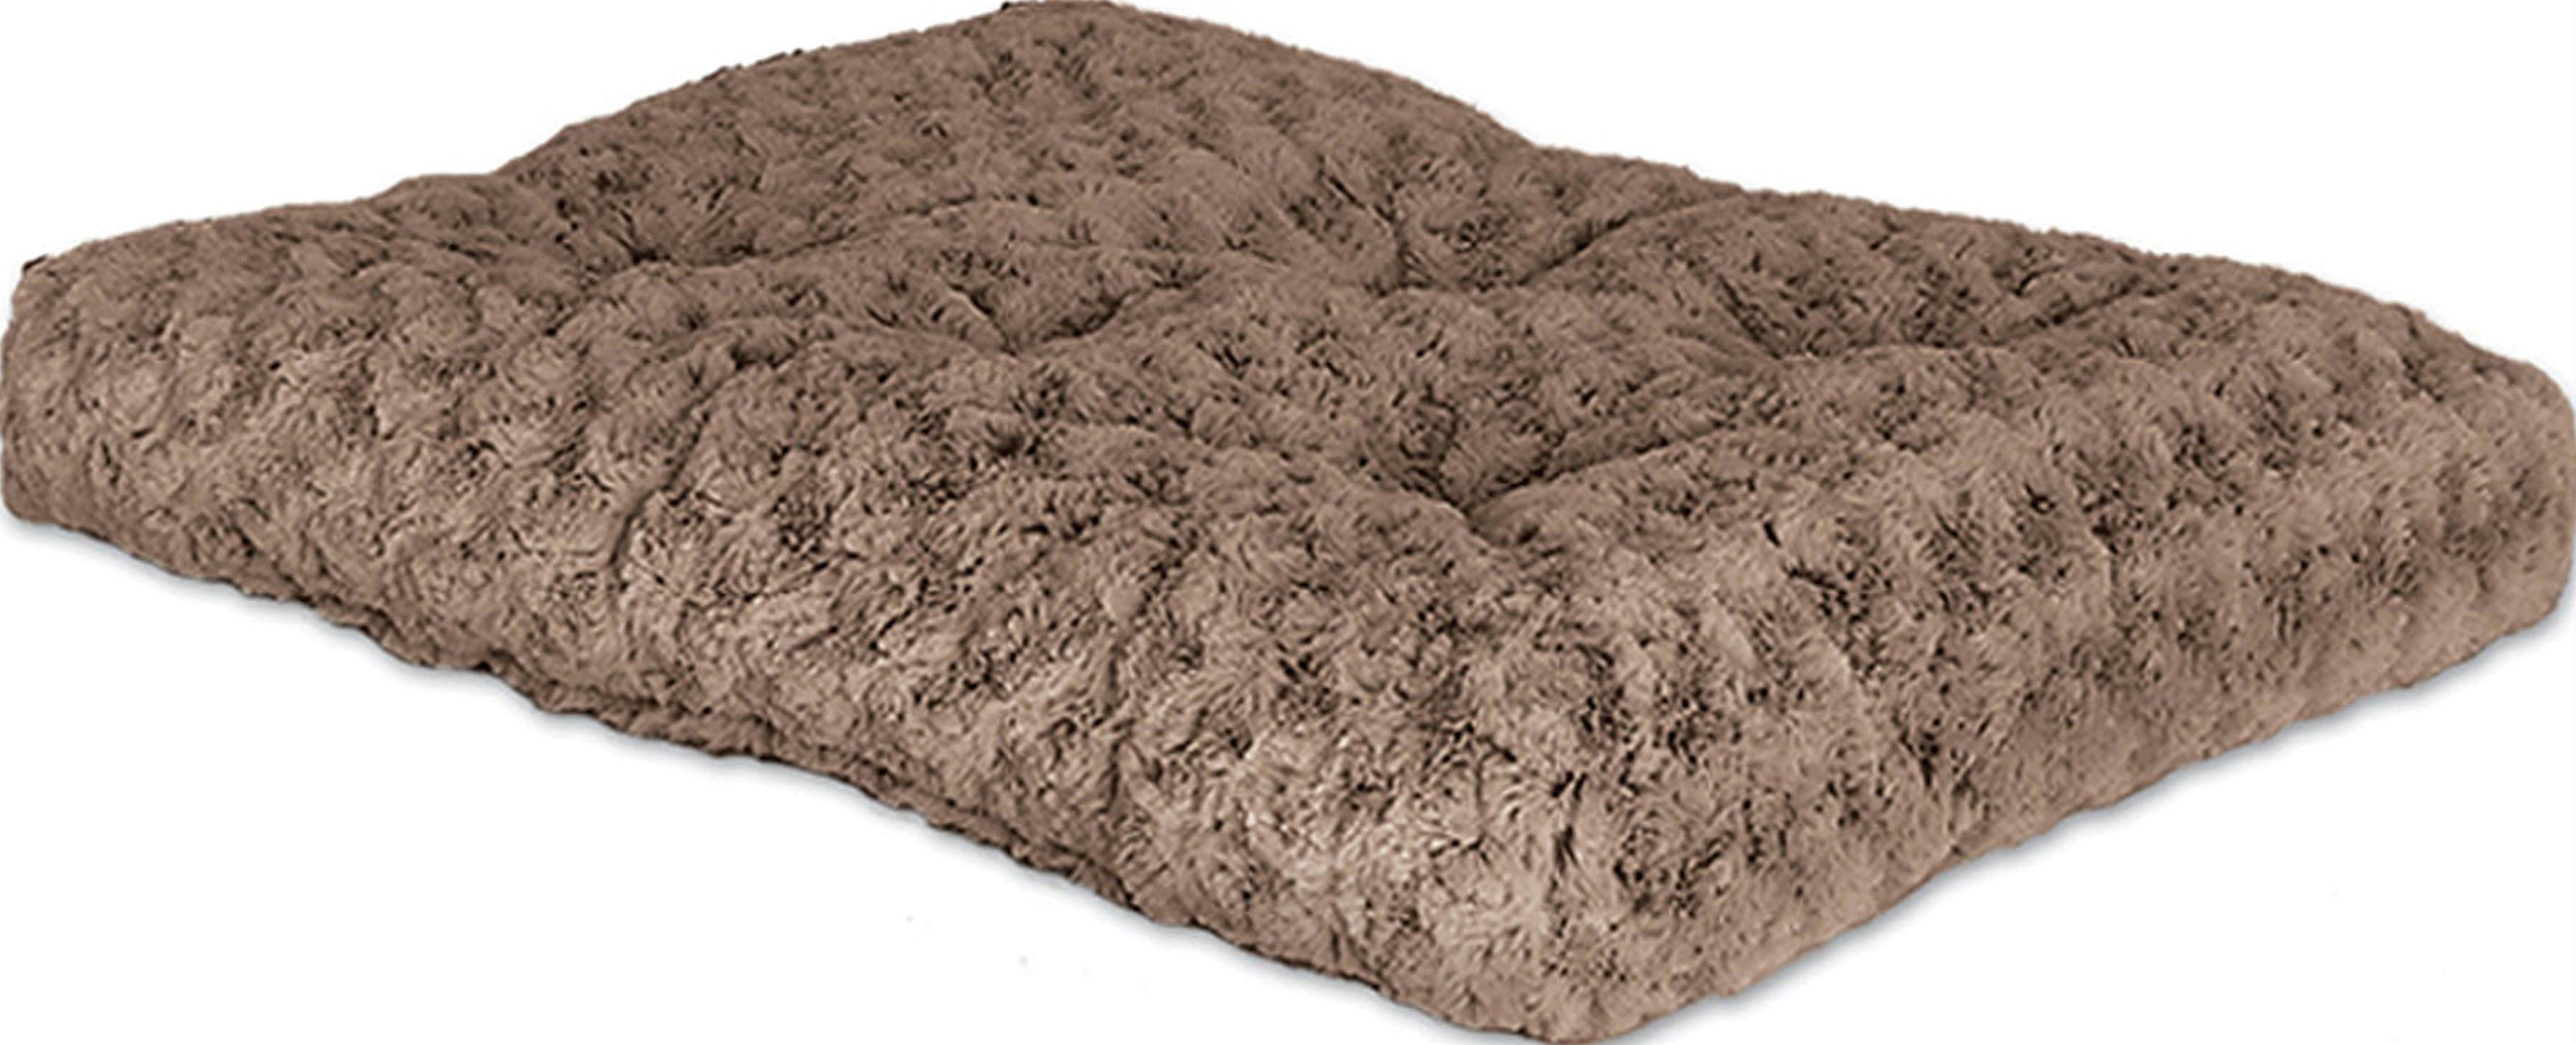 Midwest Quiet Time Pet Bed Deluxe - Tan Ombre Swirl, 35x23''